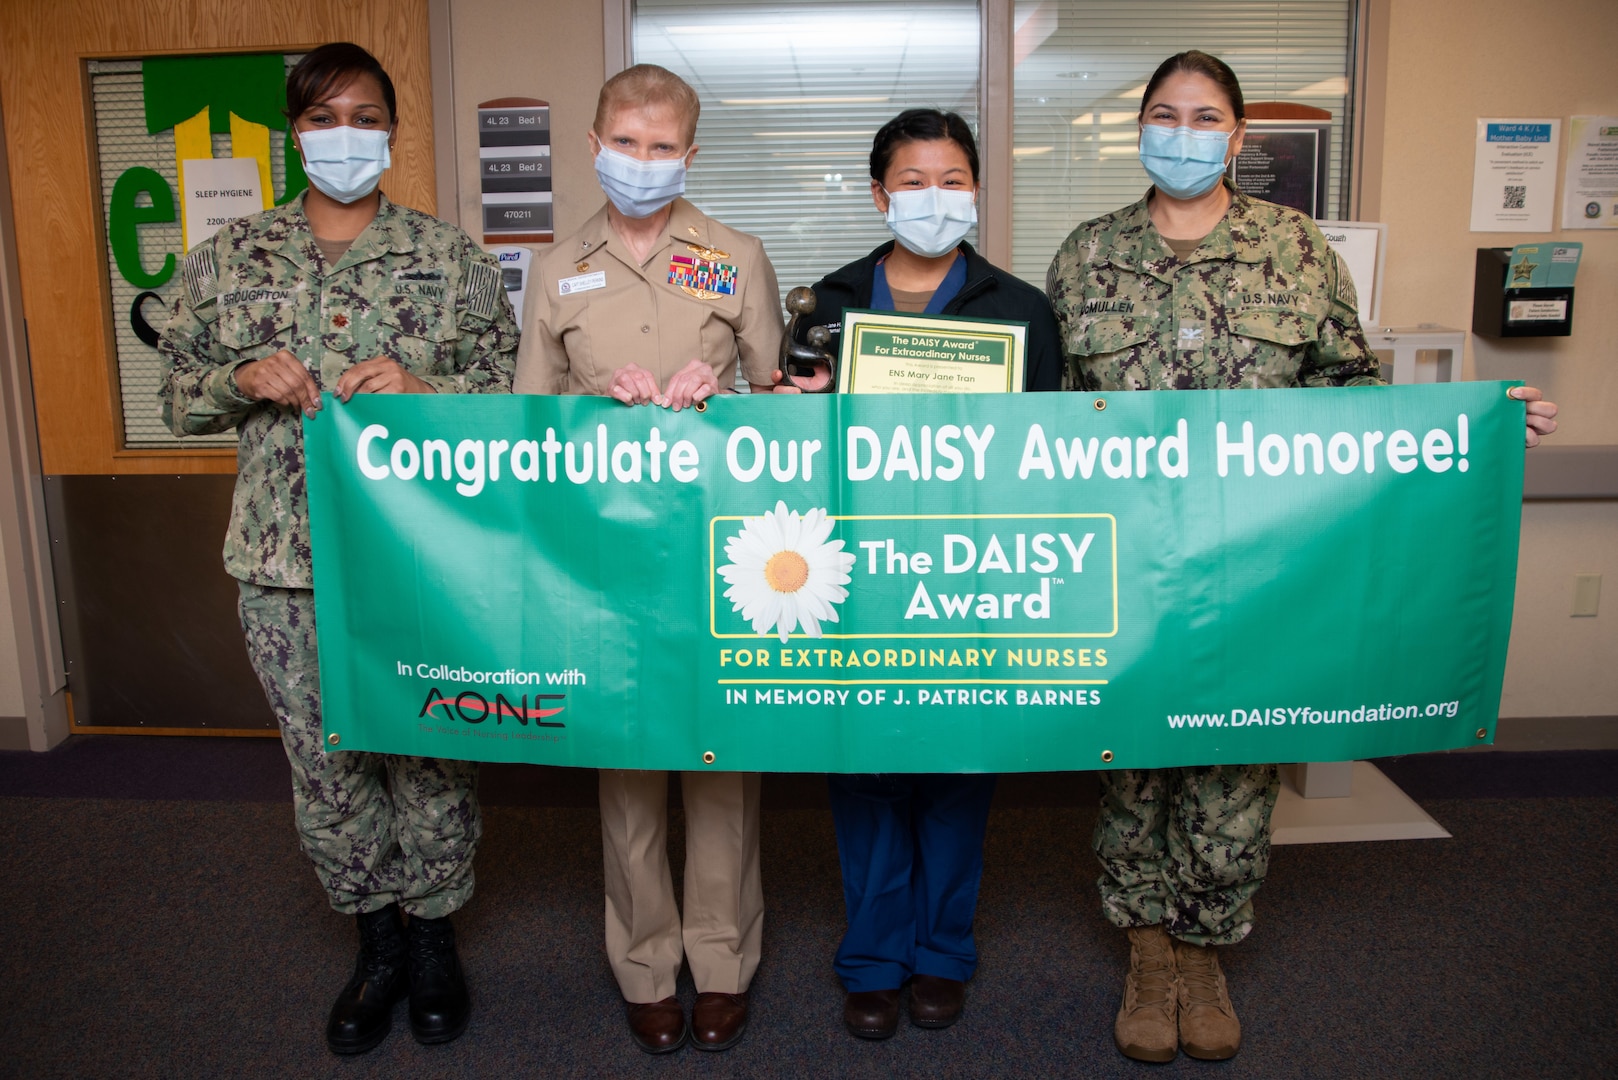 220131-N-ZM949-1007

Ensign Mary Jane Tran, a Naval Medical Center Portsmouth (NMCP) charge nurse assigned to the Mother Baby Unit, was surprised with the DAISY Award during a ceremony, Jan. 31. From the left, Lt. Cmdr. Mohneke Broughton, NMCP Maternal Child Infant department head; Capt. Shelley Perkins, NMCP’s commanding officer; Ensign Mary Jane Tran, Mother Baby Unit charge nurse; and Capt. Laura Lakshimi, NMCP’s Chief Nursing Officer and Nursing Services director.